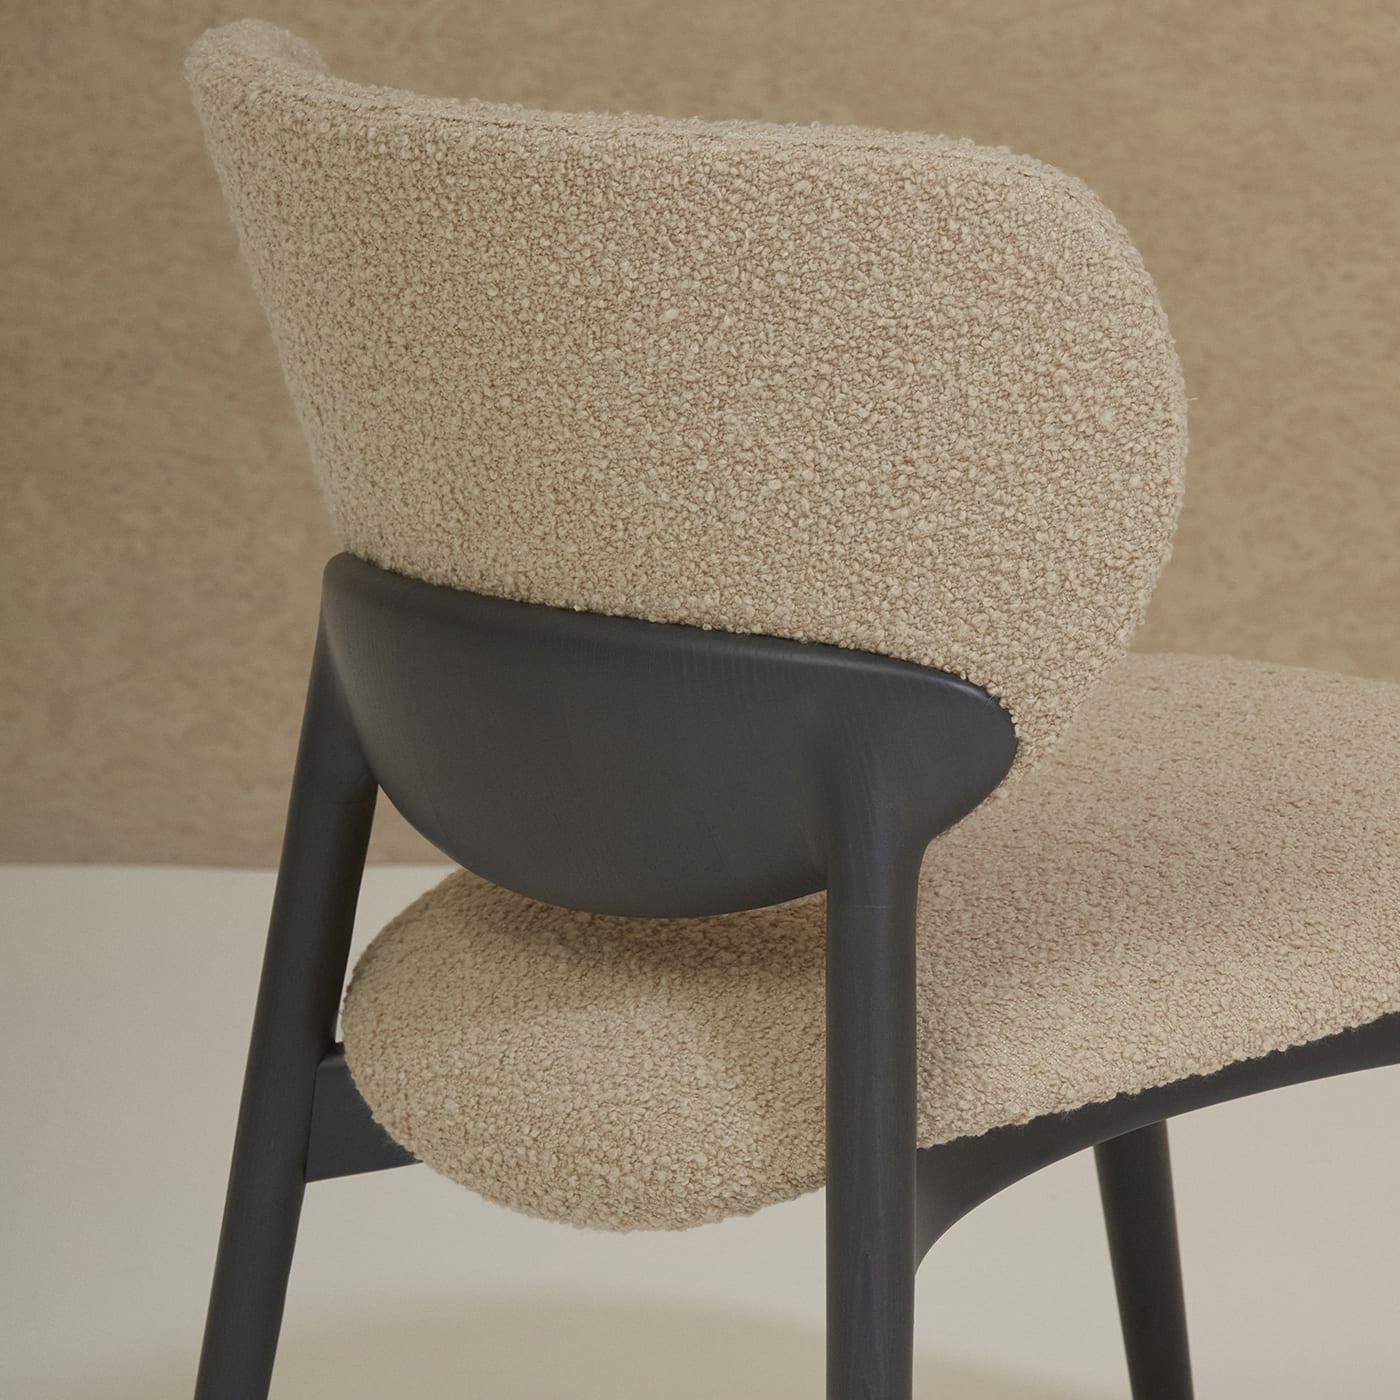 Offered in a sharp yet harmonious contrast of neutrals, this lounge chair is a refined modern-inspired design perfect for blending in a private study or living room. Textured beige-hued Tresigallo fabric (2893) elopes both the ergonomic 42cm-high